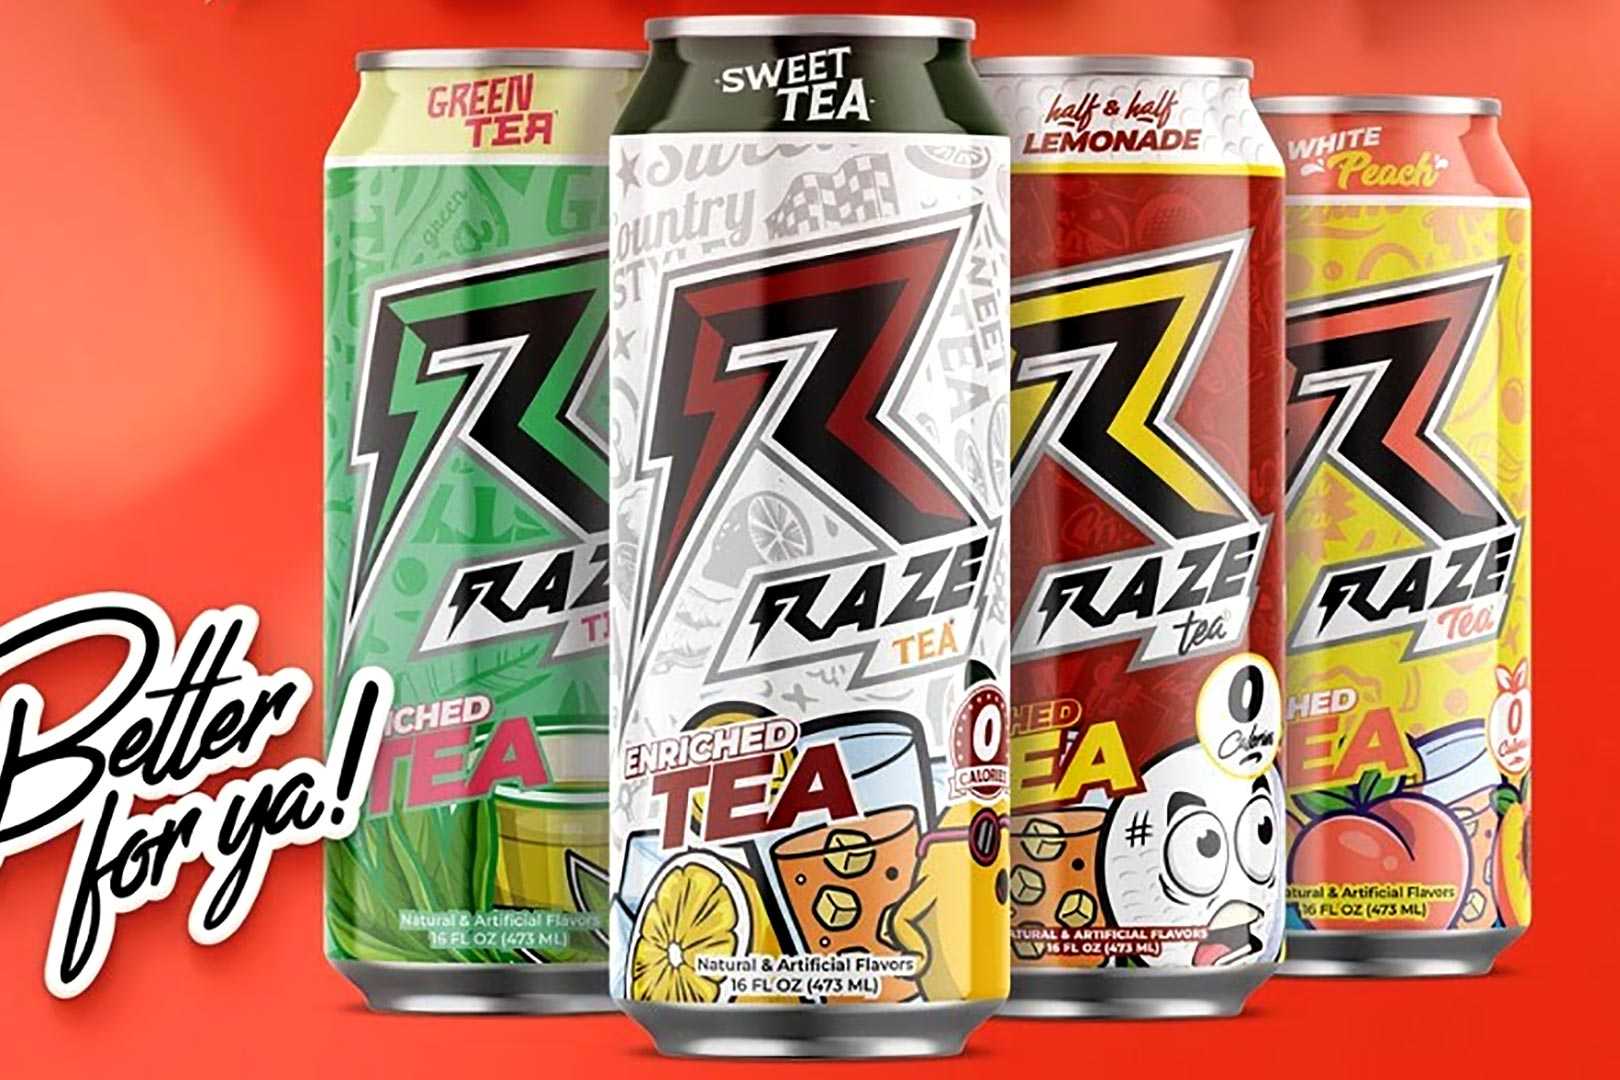 RAZE previews its non-carbonated black tea-based energy drink with zero calories